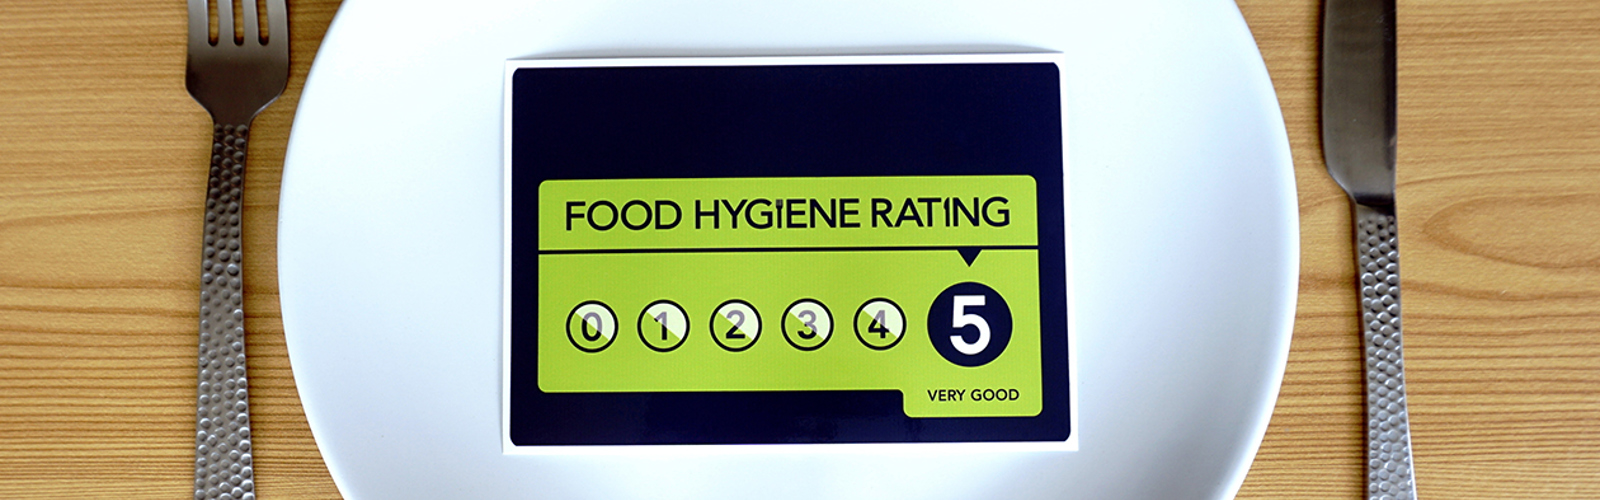 Food Hygiene Rating card on a plate